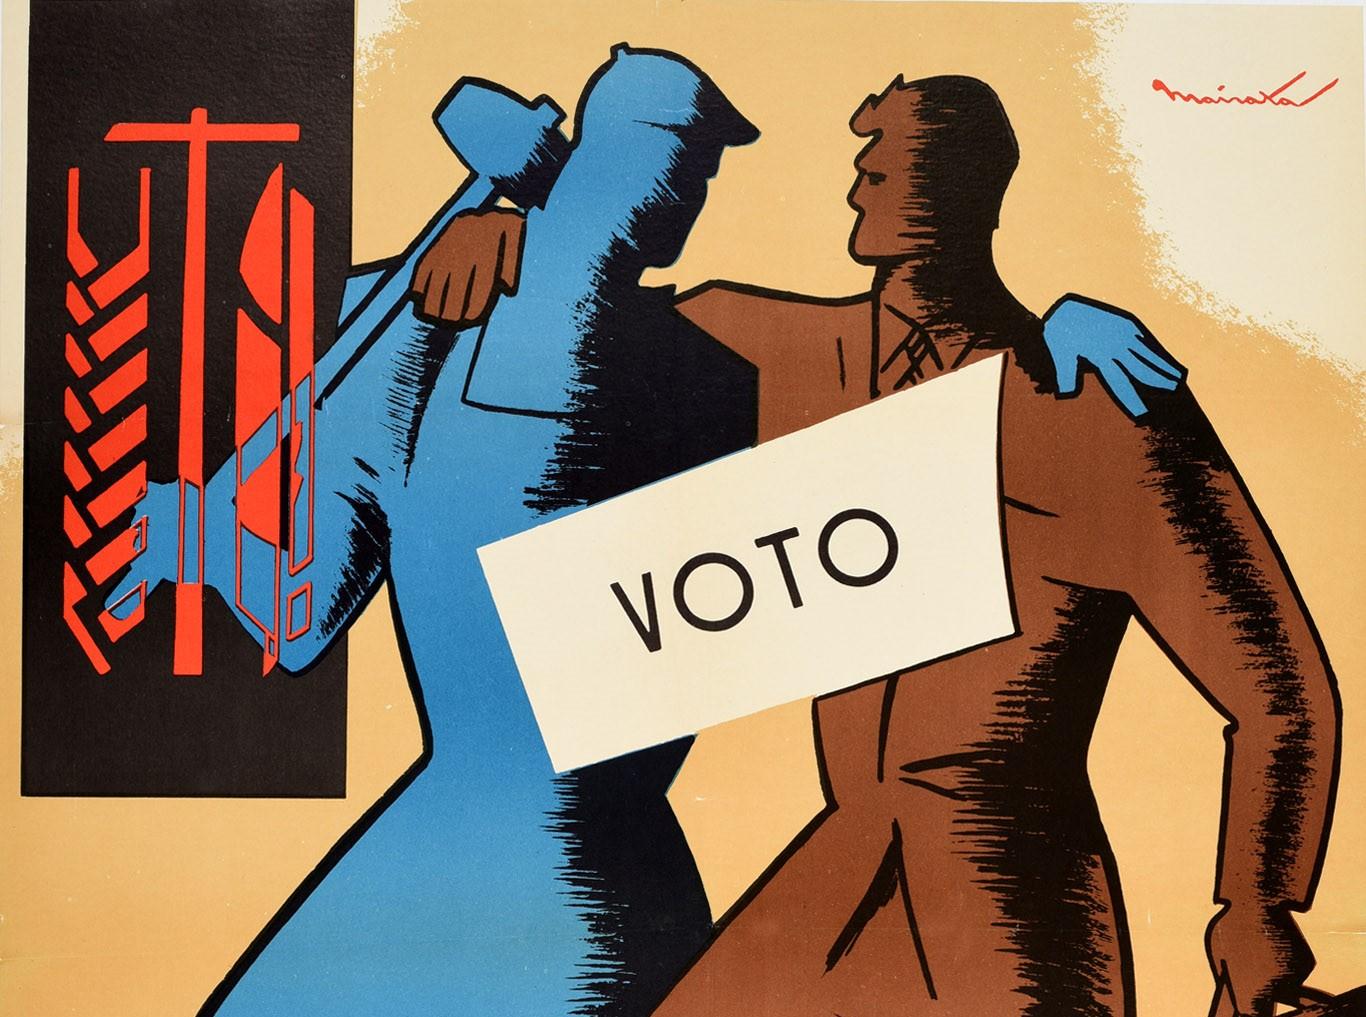 Original vintage propaganda poster - Union Elections Call 1963 / Elecciones Sindicales Convocatoria 1963 - featuring a great design showing two workers with their arms around each other and a sign - Voto / Vote - across the image, one man a factory